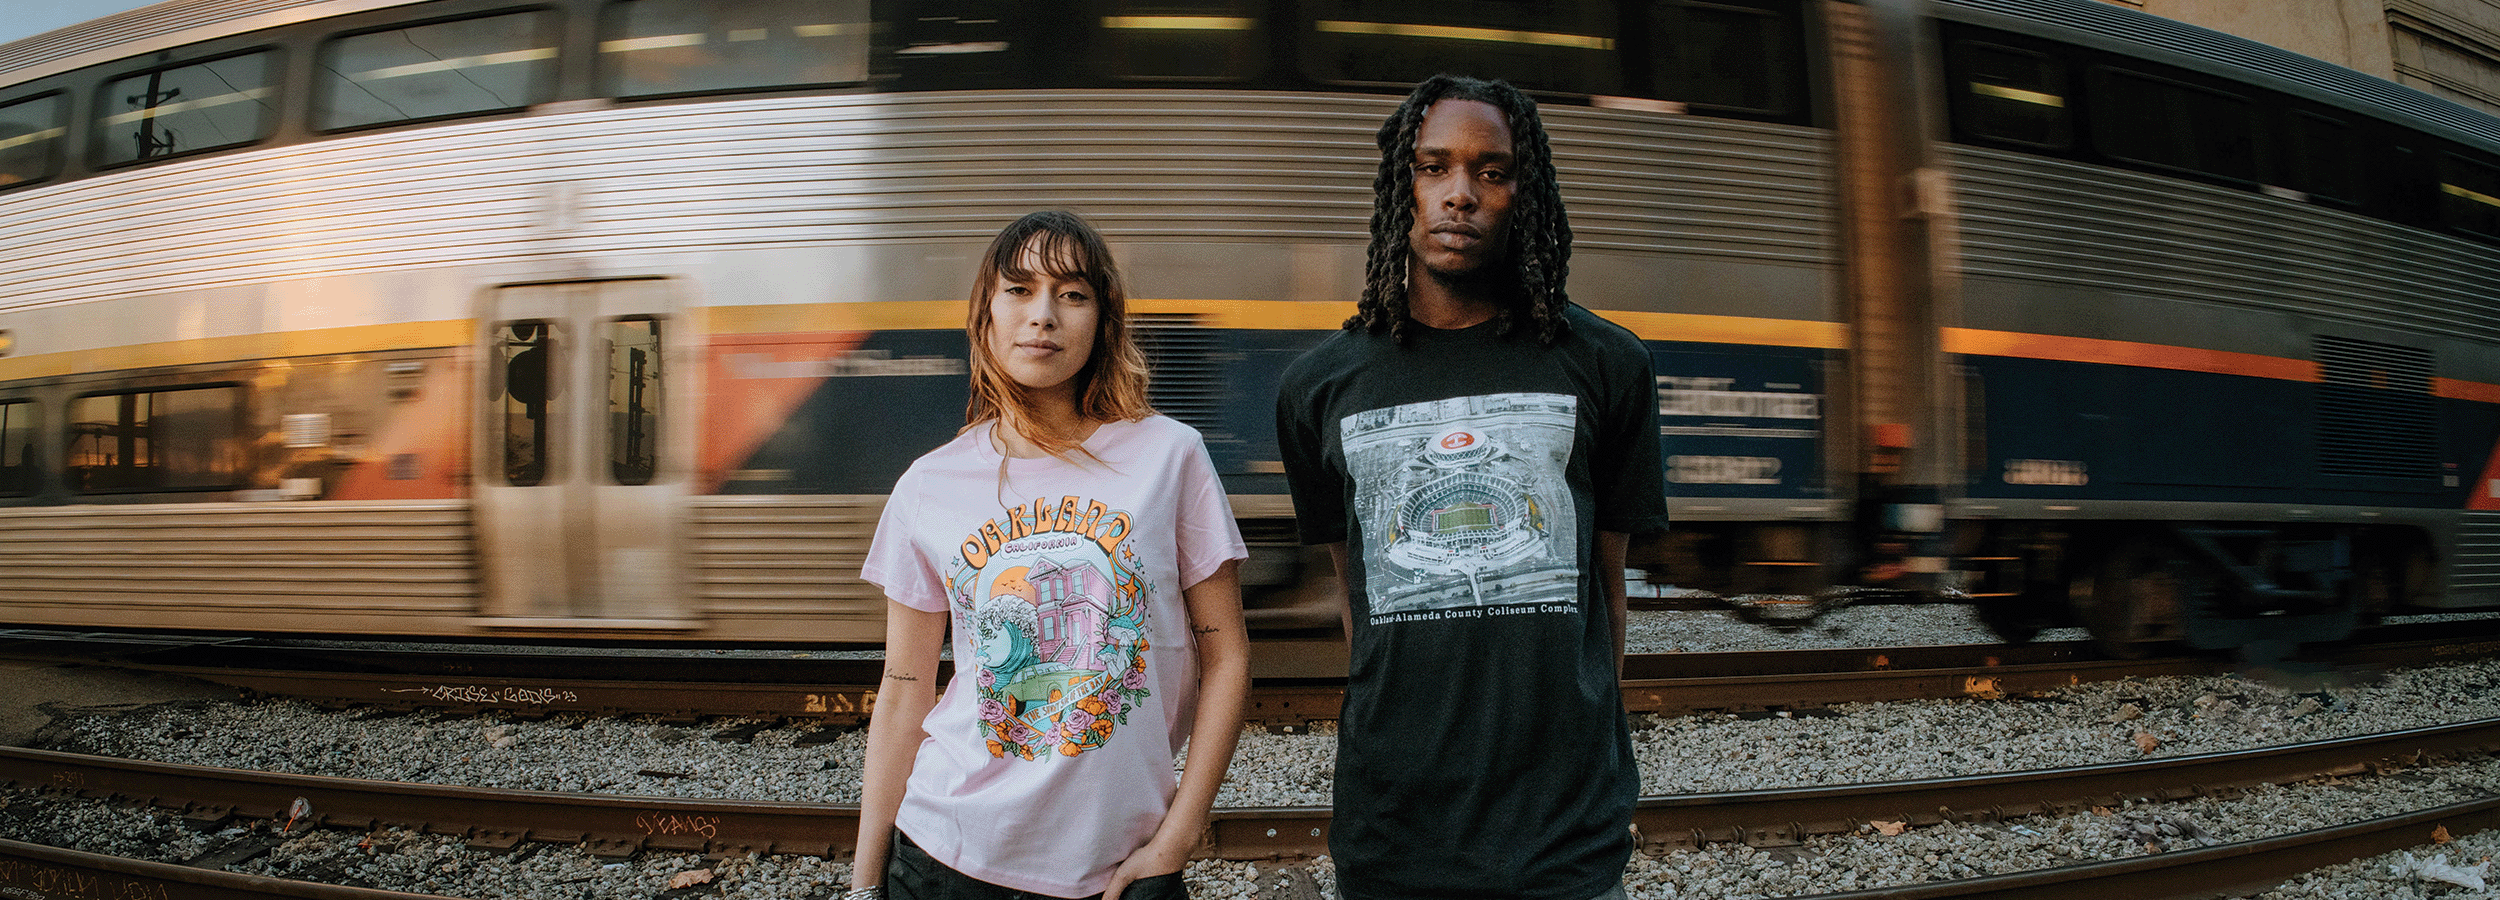 Models wearing Oakland Dream and Mems tees in front of a moving train.